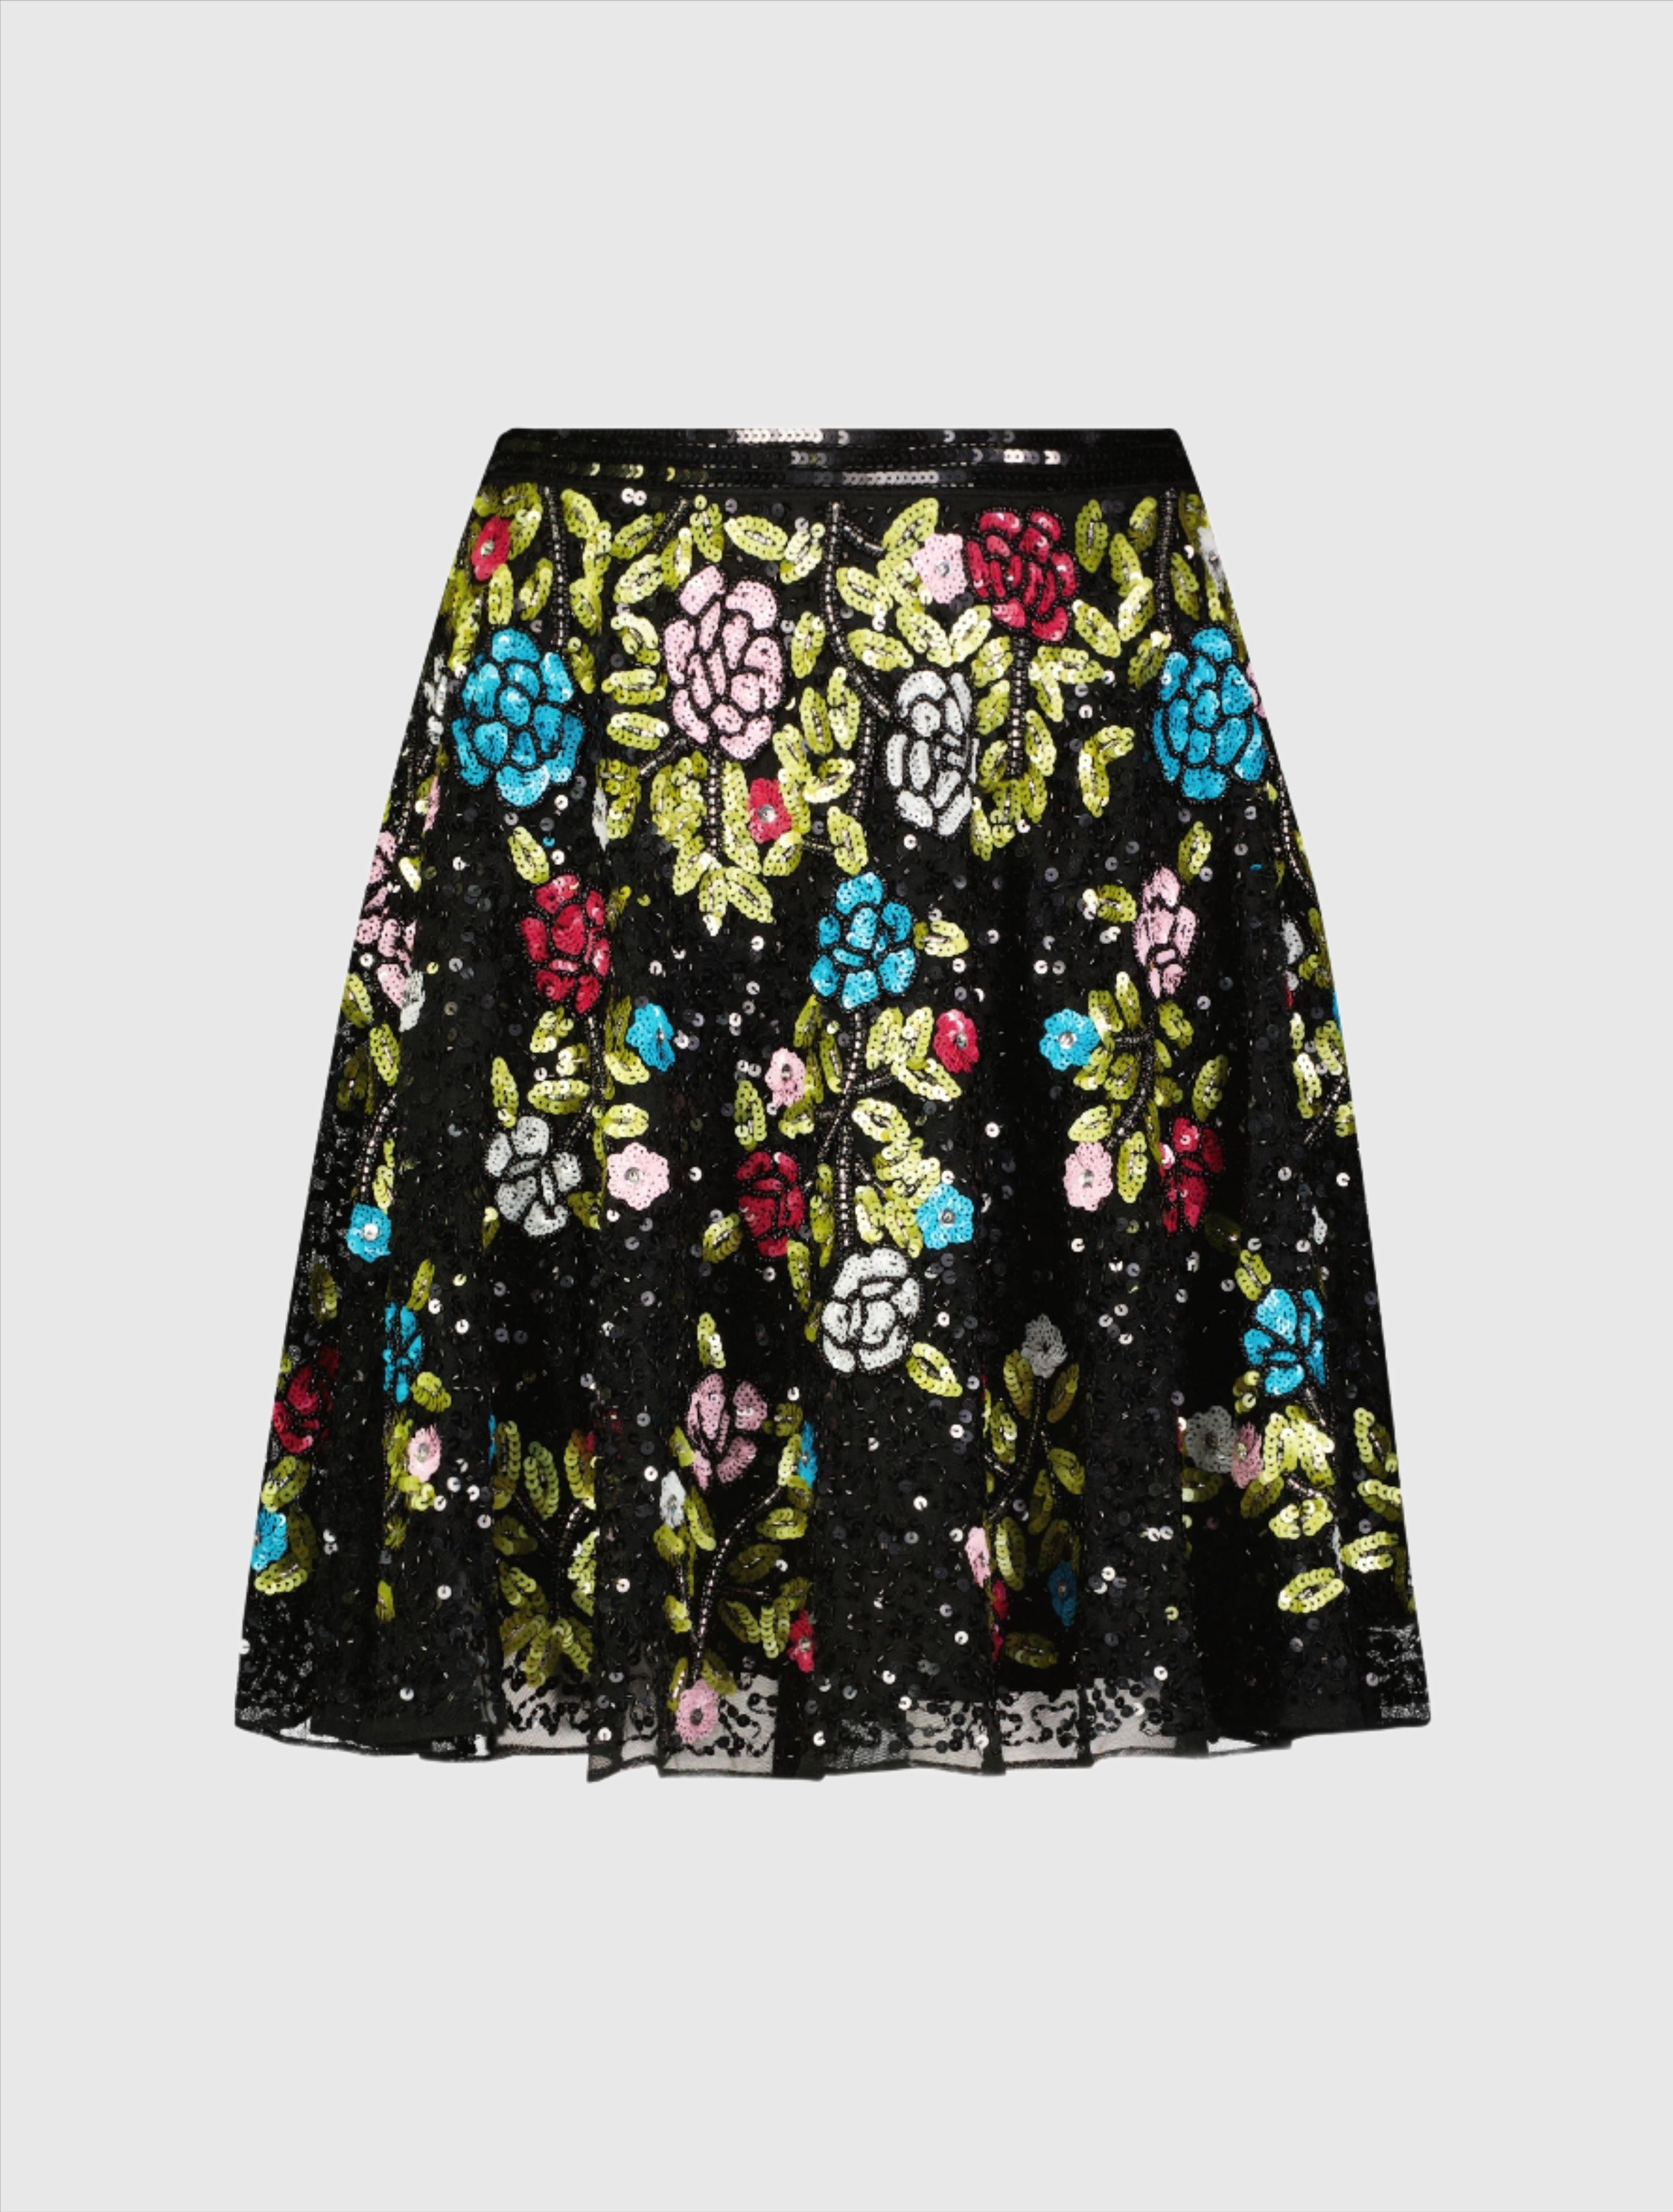 Sequined Floral Flowy A-line Mini Skirt